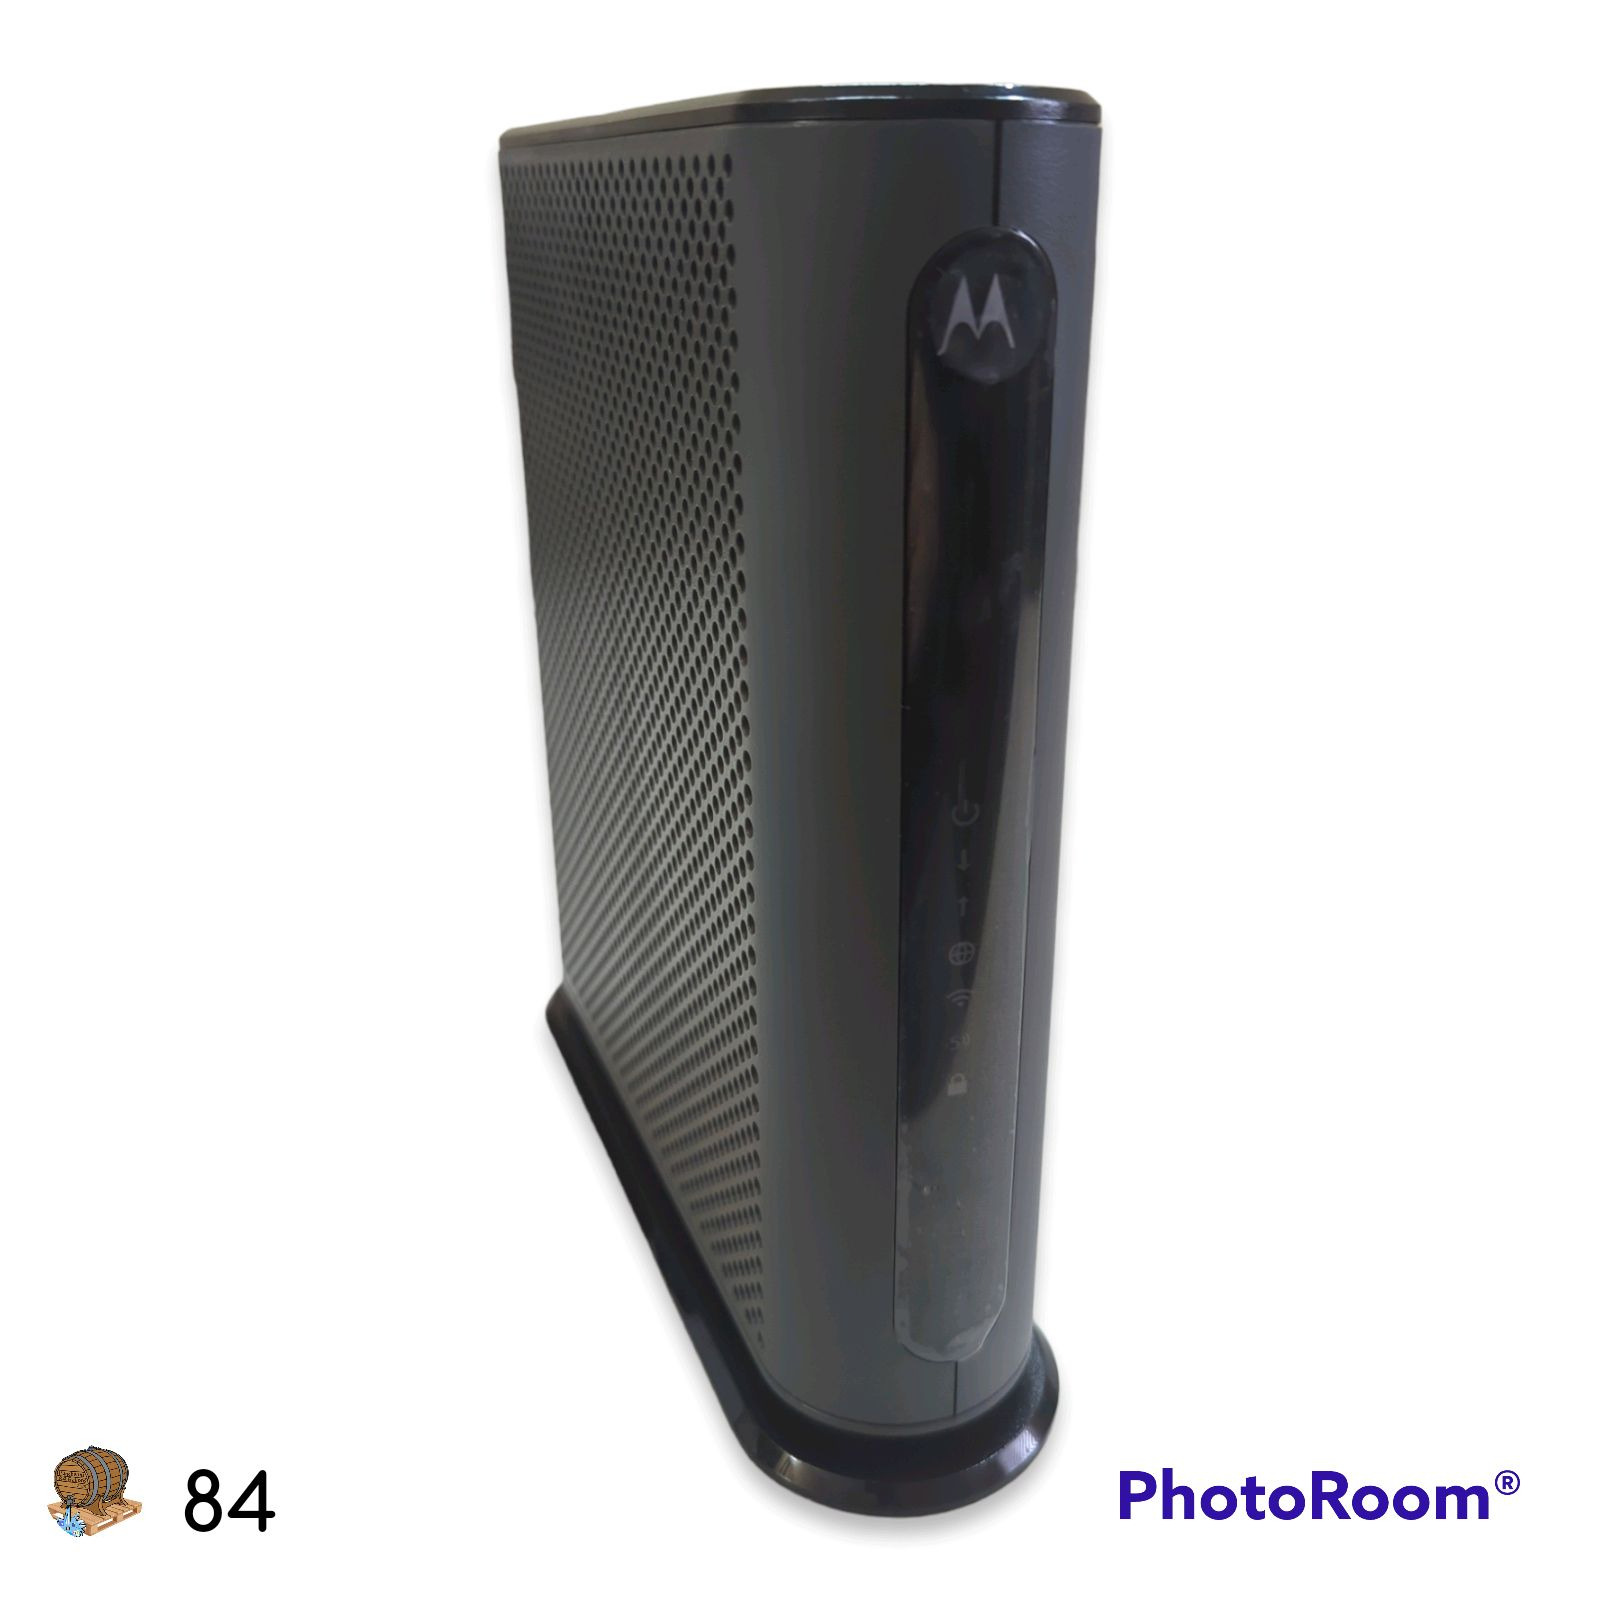 MOTOROLA MG7550-10 16 X 4  Cable Modem + AC1900 WiFi Router w/ 4 Ethernet Ports